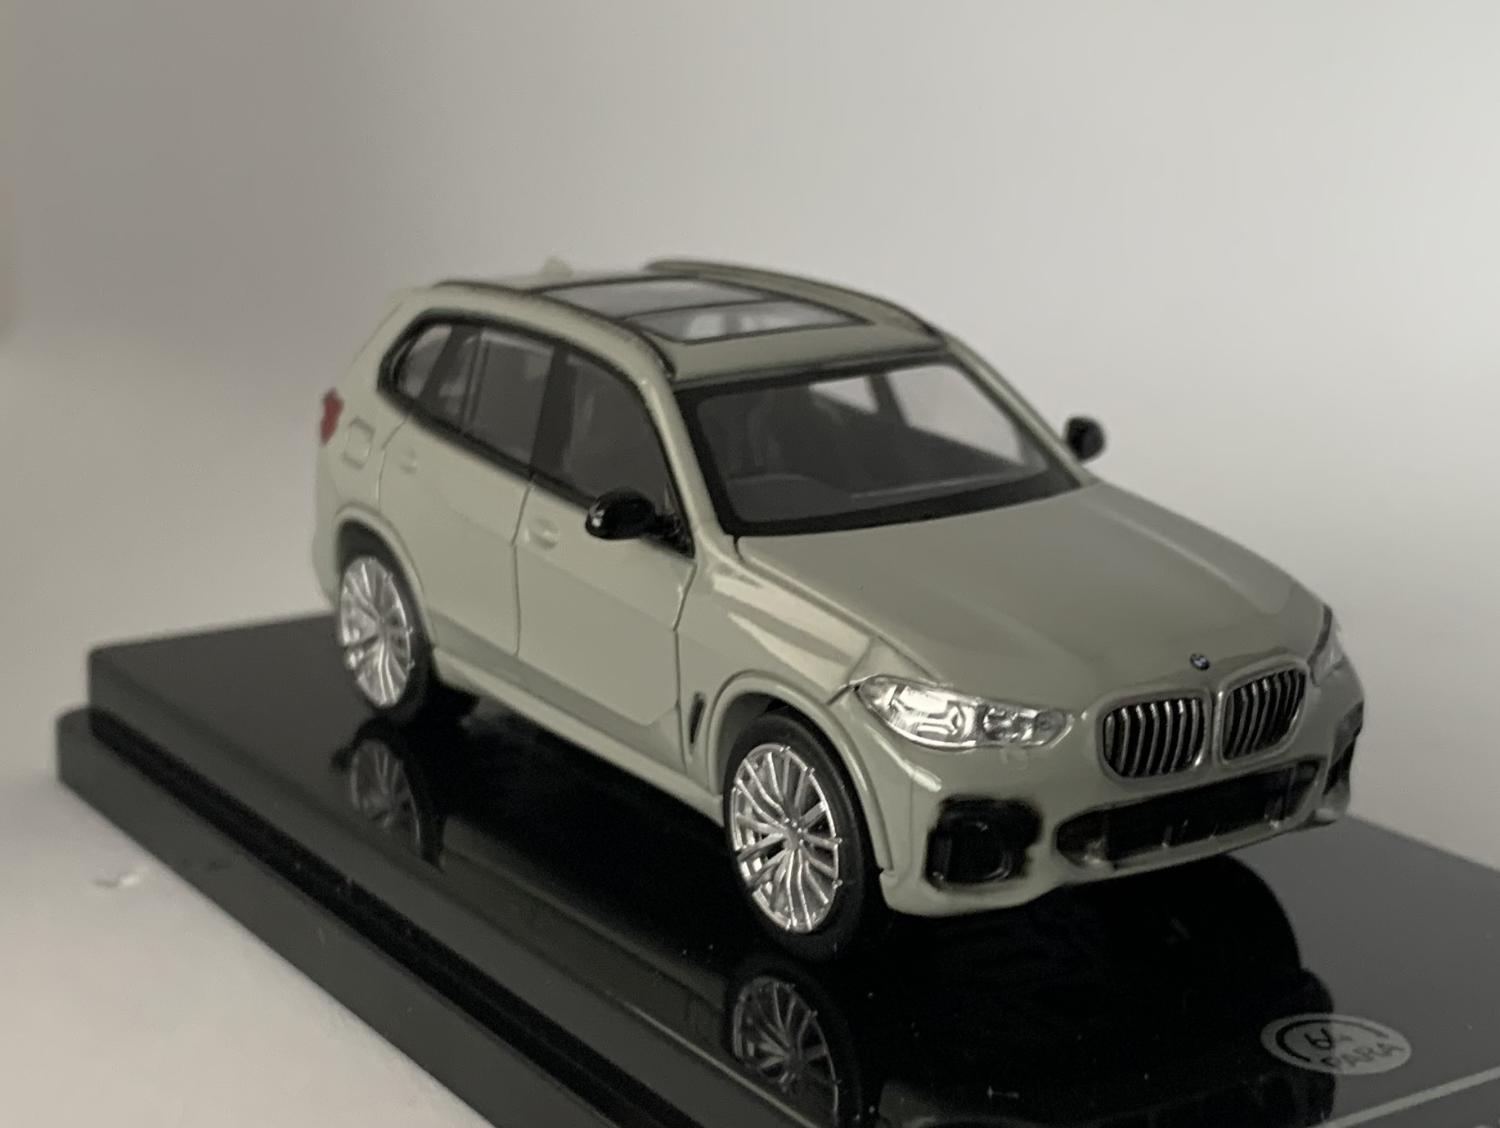 BMW X5 in nardo grey 1:64 scale model from Paragon Models